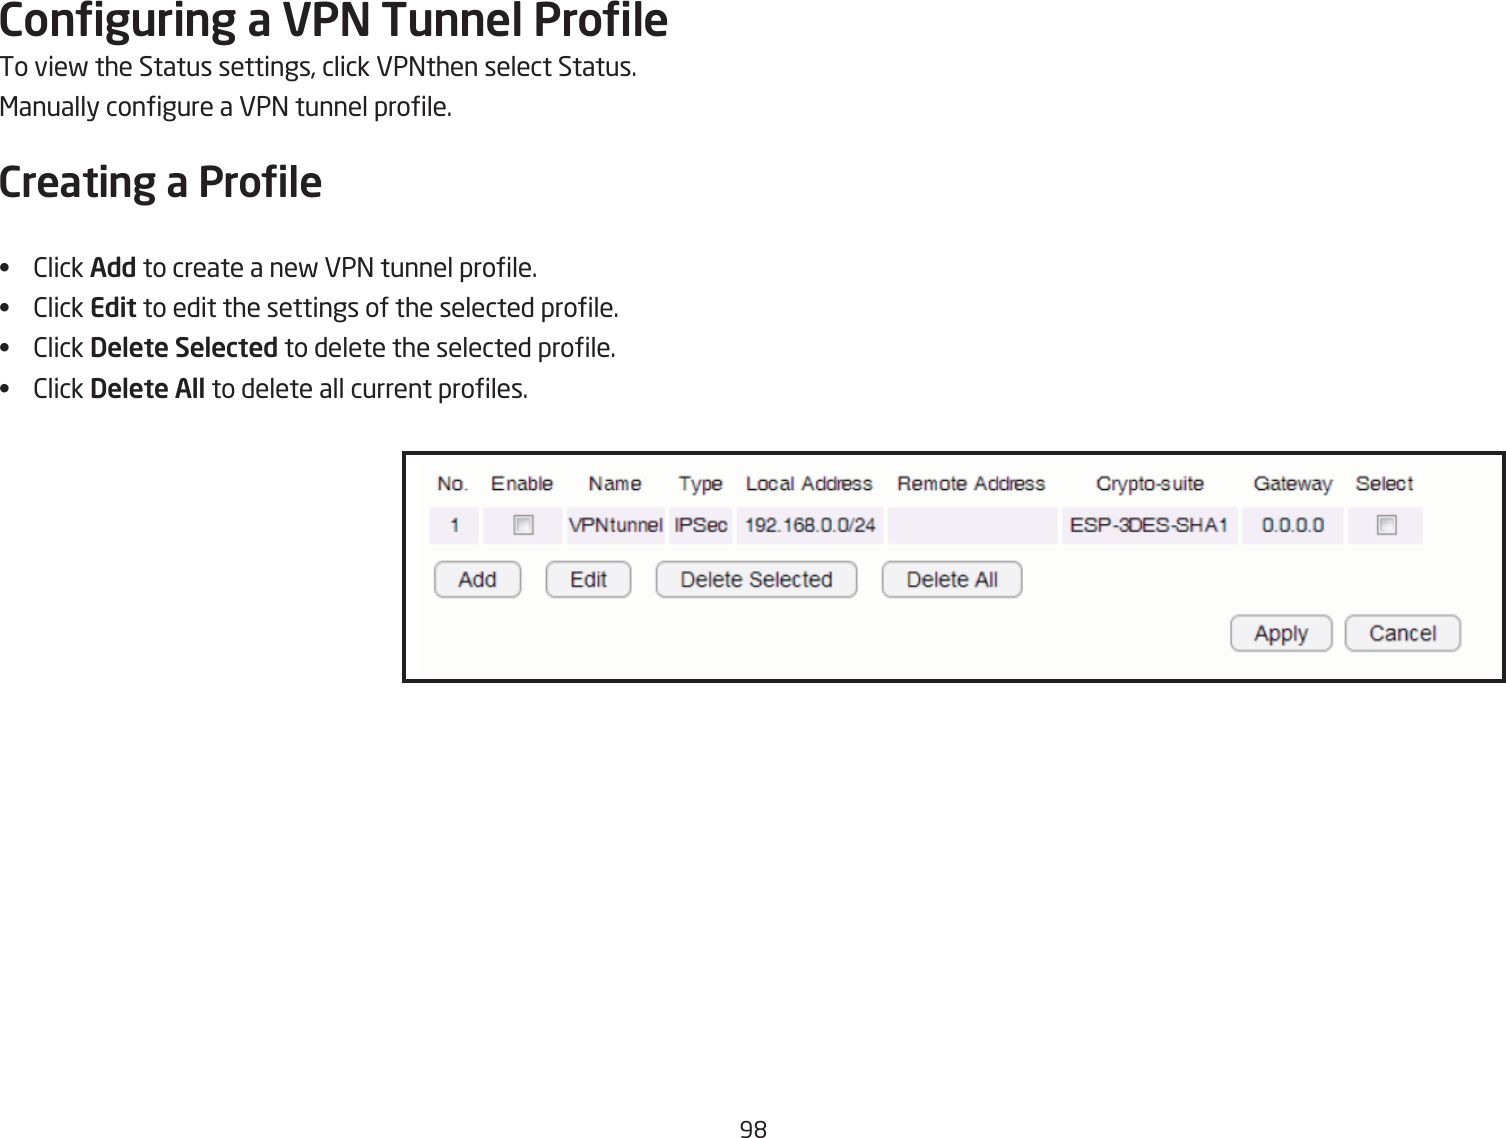 9&apos;Conguring a VPN Tunnel ProleTo vief the Status settings, click VP=then select Status.&lt;anually congure a VP= tunnel prole.Creating a Prole•  2lick Add to create a nef VP= tunnel prole.•  2lick Edit to edit the settings of the selected prole.•  2lick Delete Selected to delete the selected prole.•  2lick Delete All to delete all current proles.